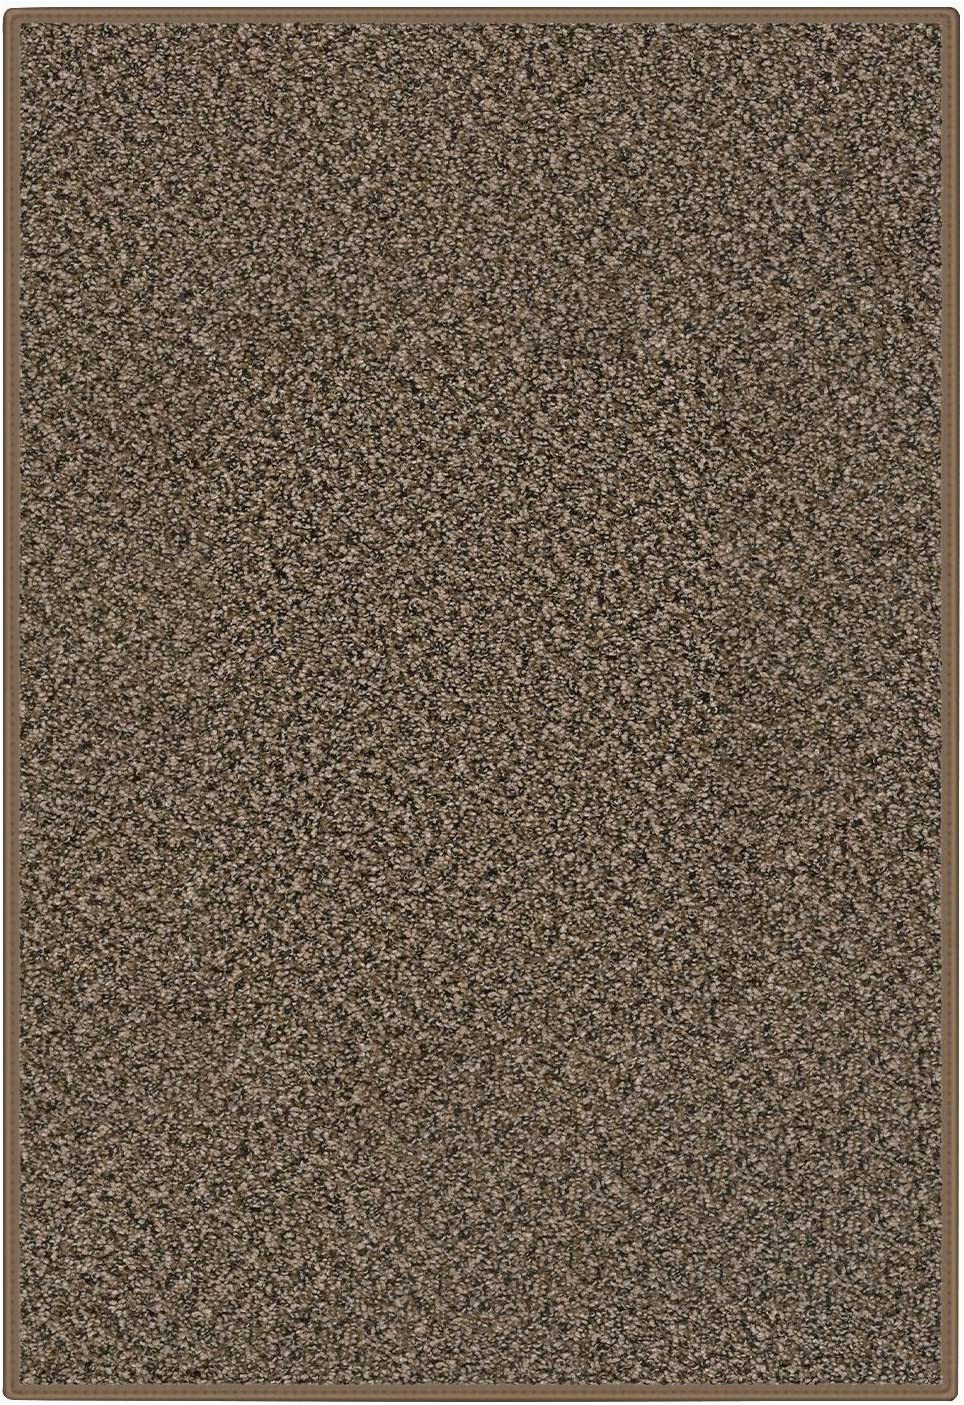 Cut Carpet for area Rug Custom Cut to Fit area Rug with Multiple Colors to Choose From Perfect for First Time Home and Apartments Renters 8 X10 Black & Tan